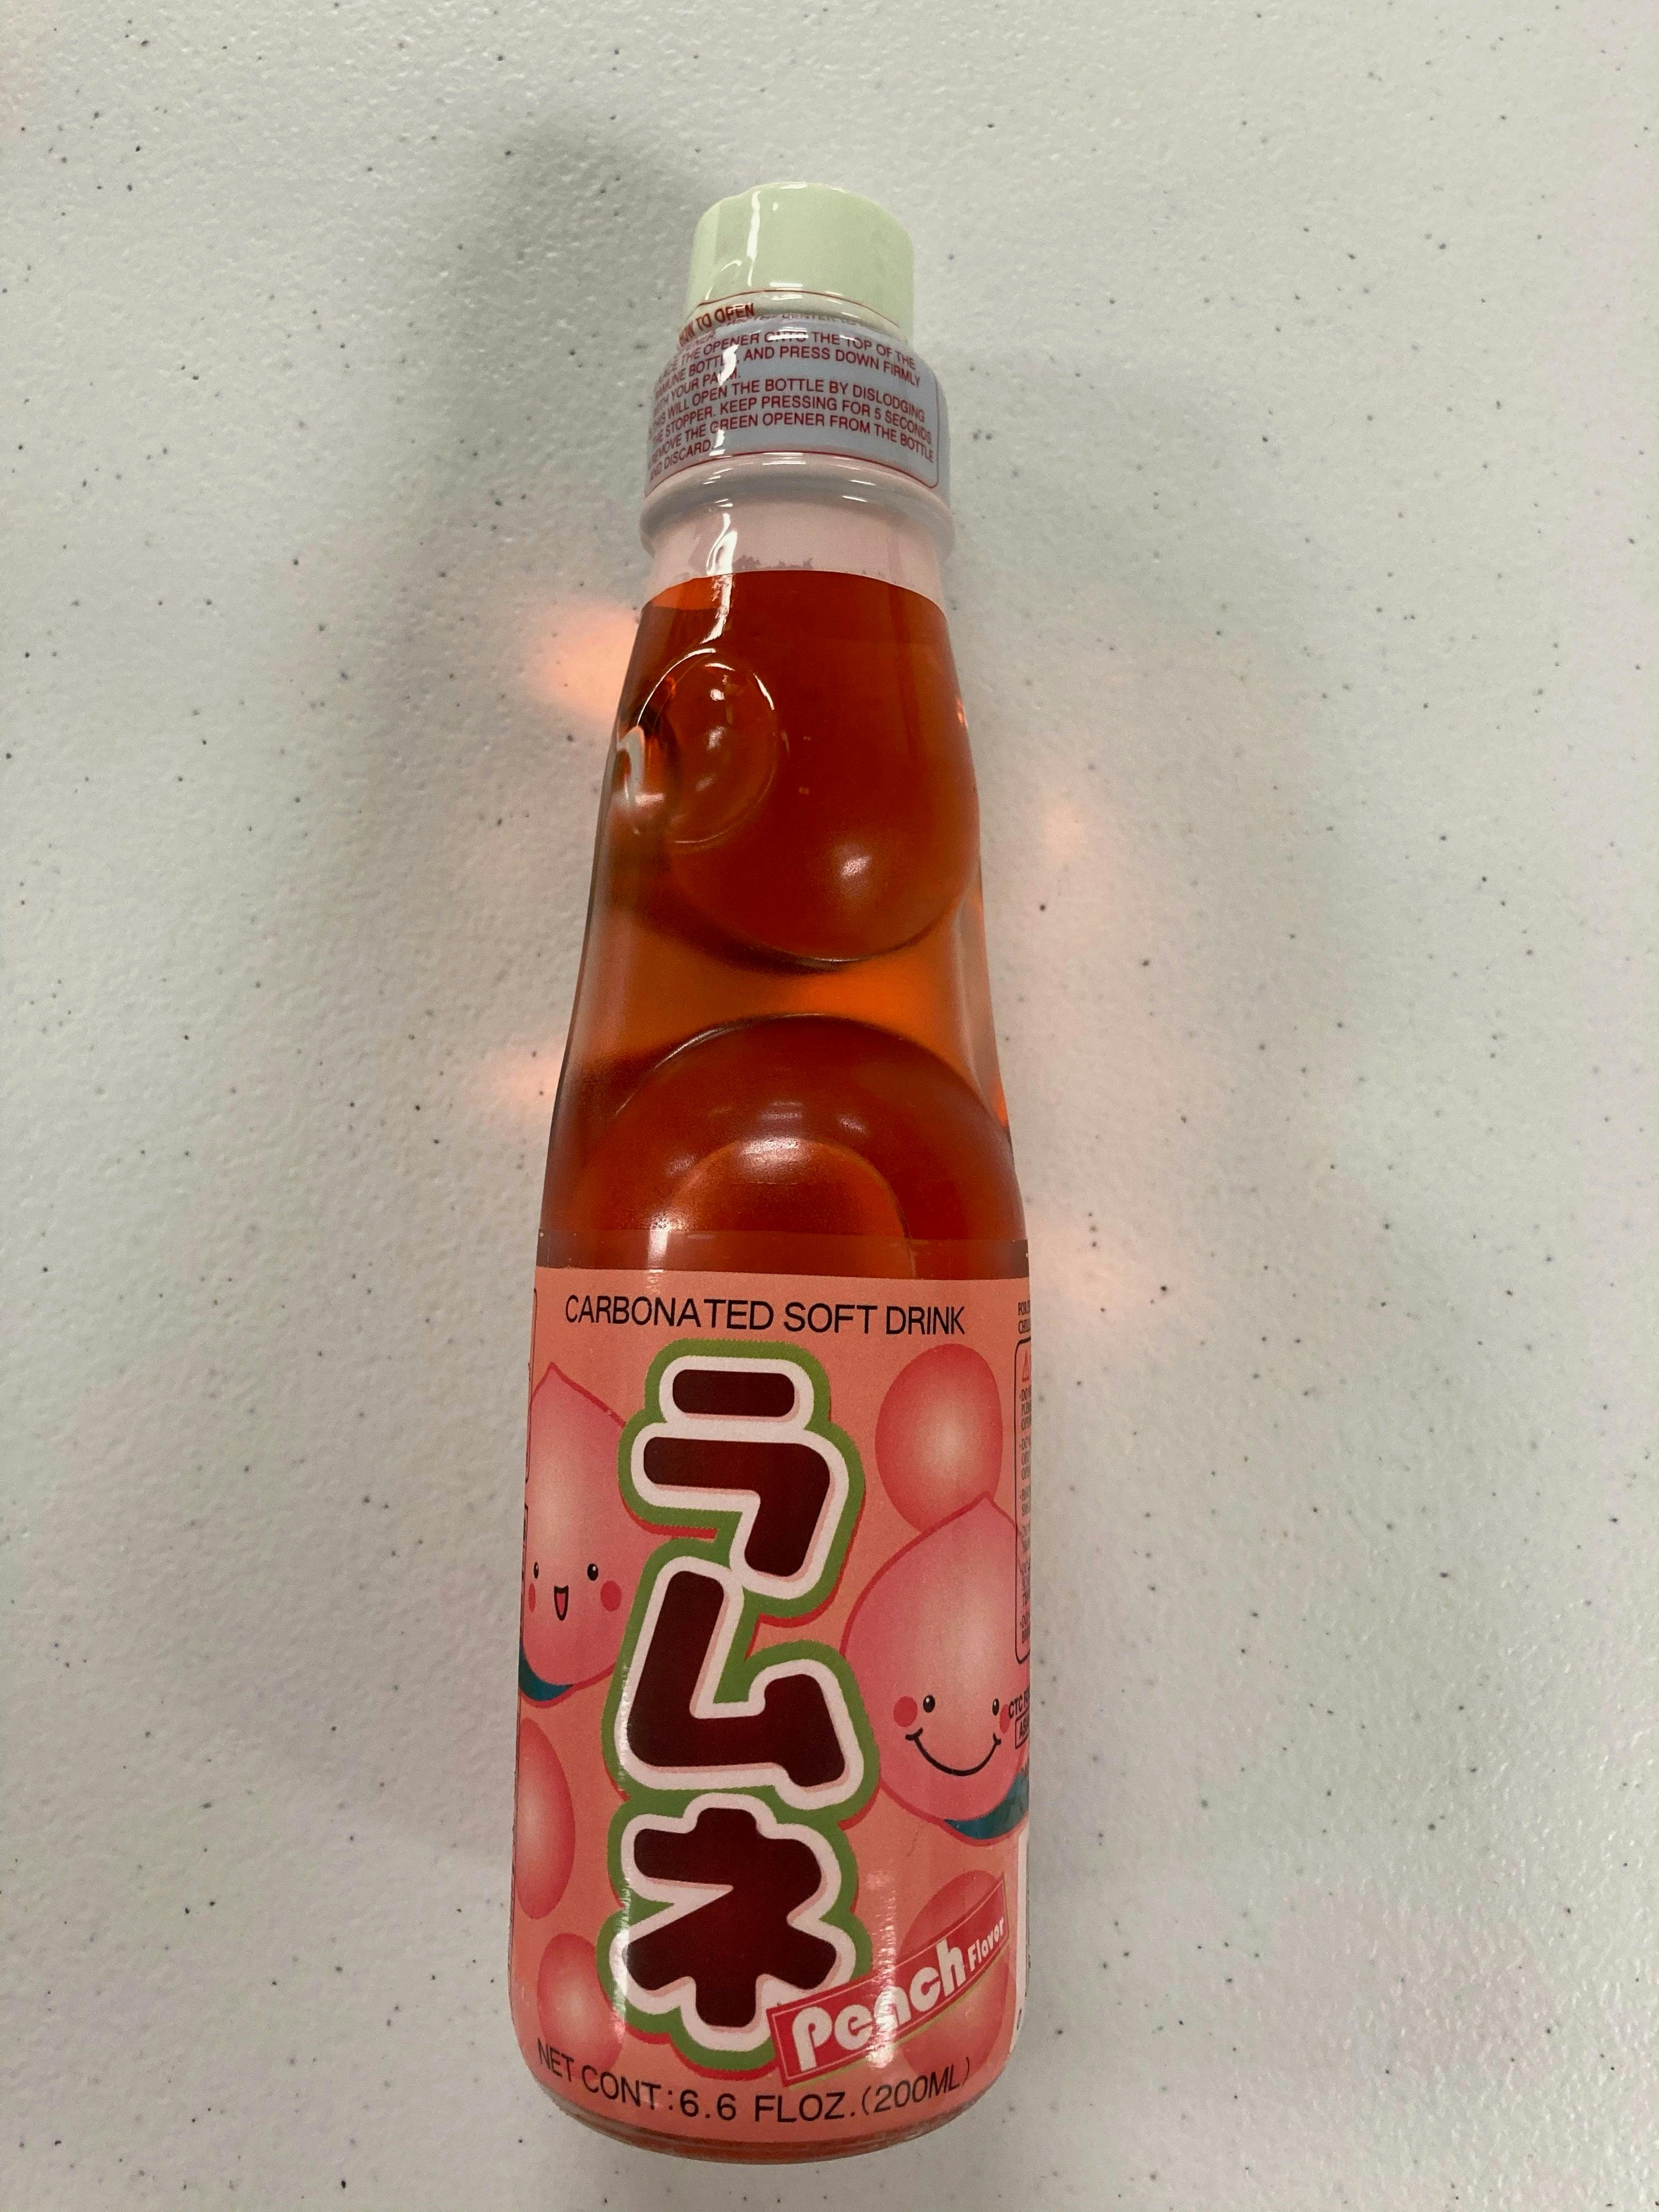 Peach-Flavored Carbonated Soft Drink 200ml